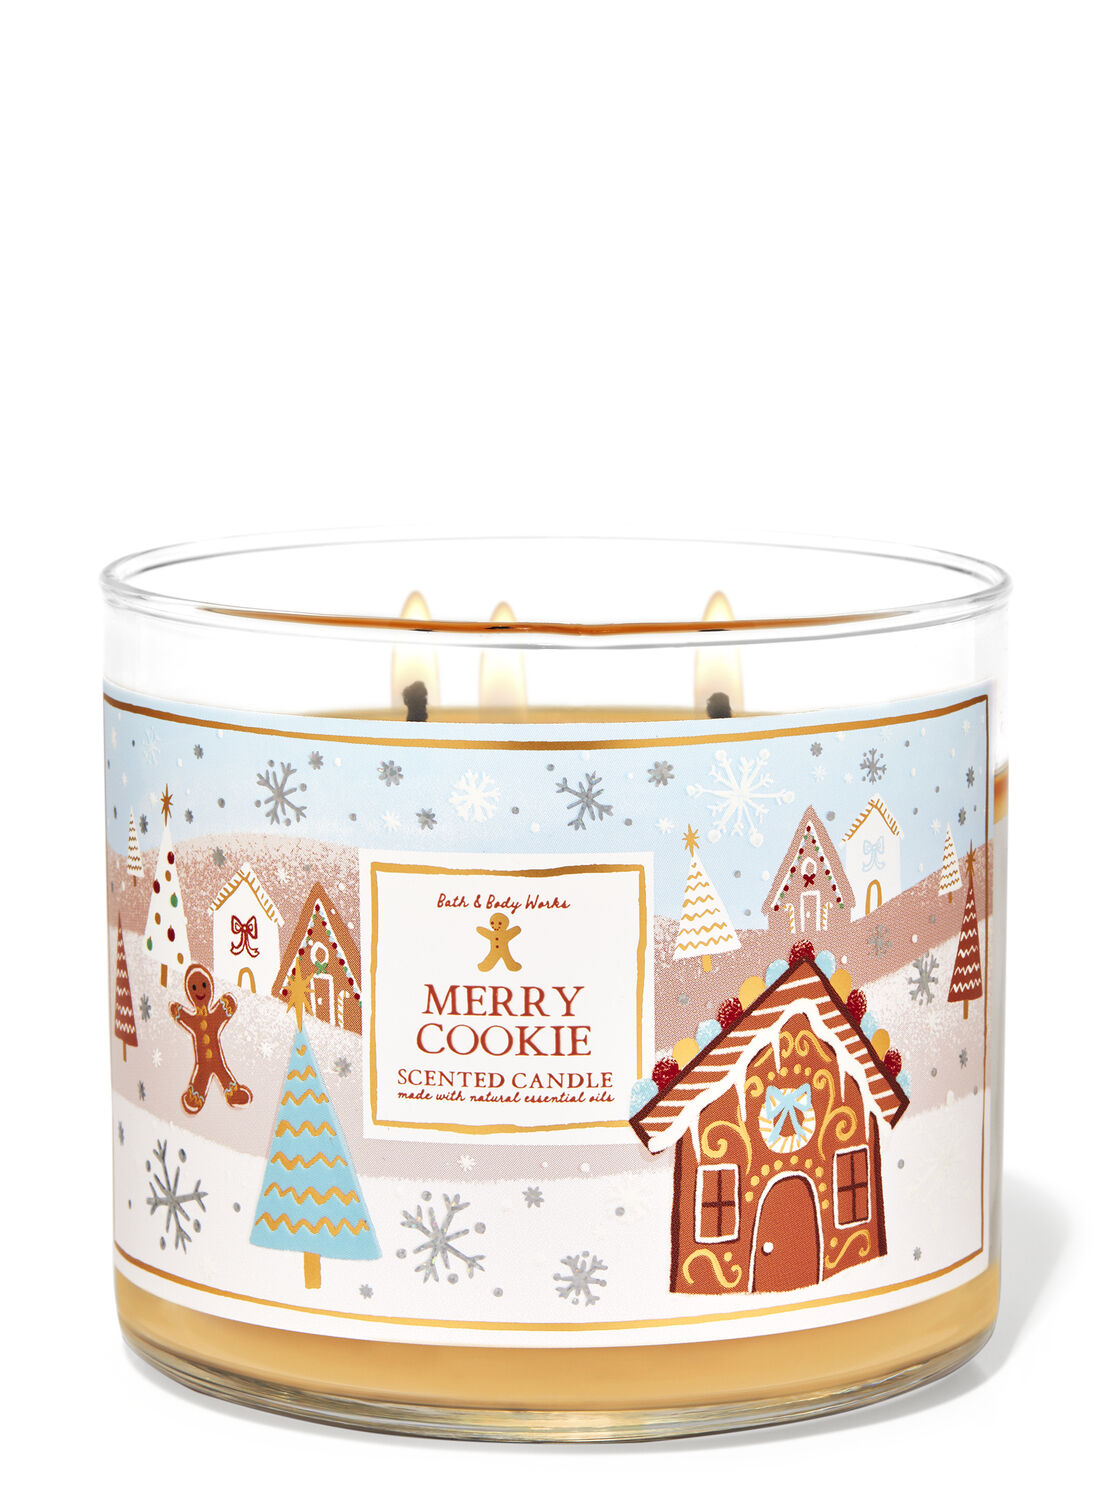 Hrs NEW Bath & Body Works HOLIDAY MERRY MADELEINE COOKIE 3 Wick Candle BURNS 25 